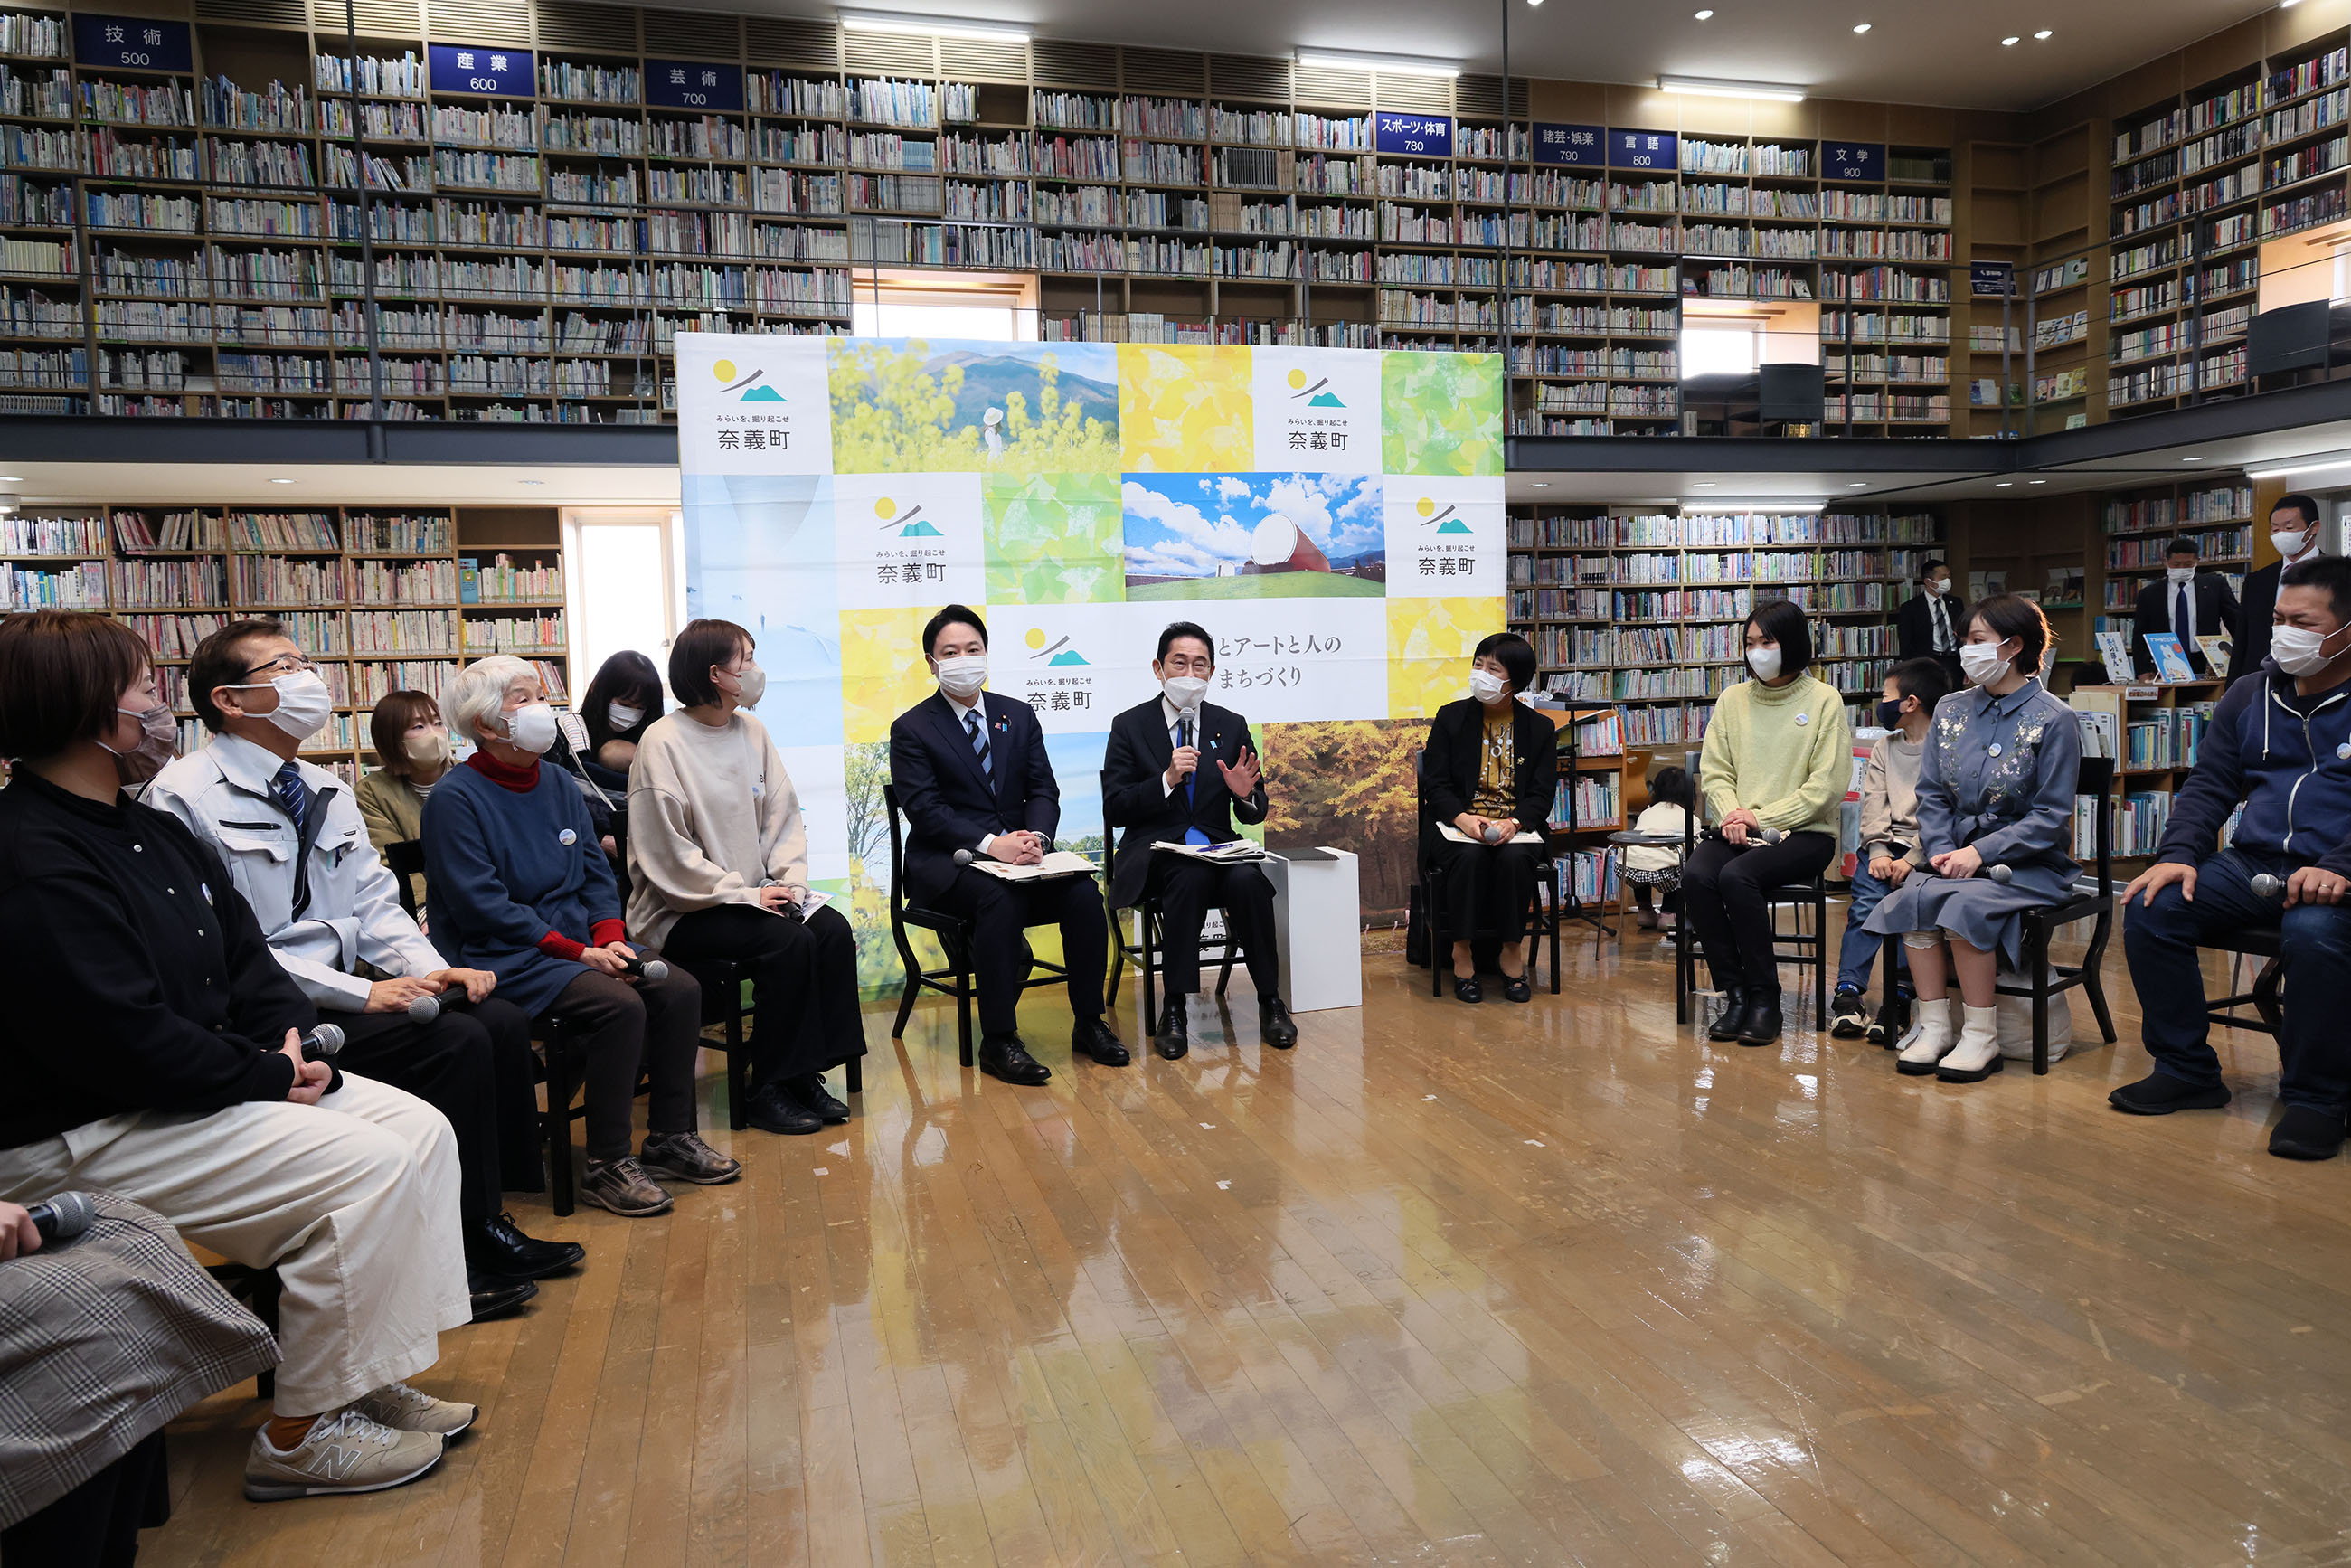 Prime Minster Kishida talking with participants in a public dialogue on policies related to children (7)